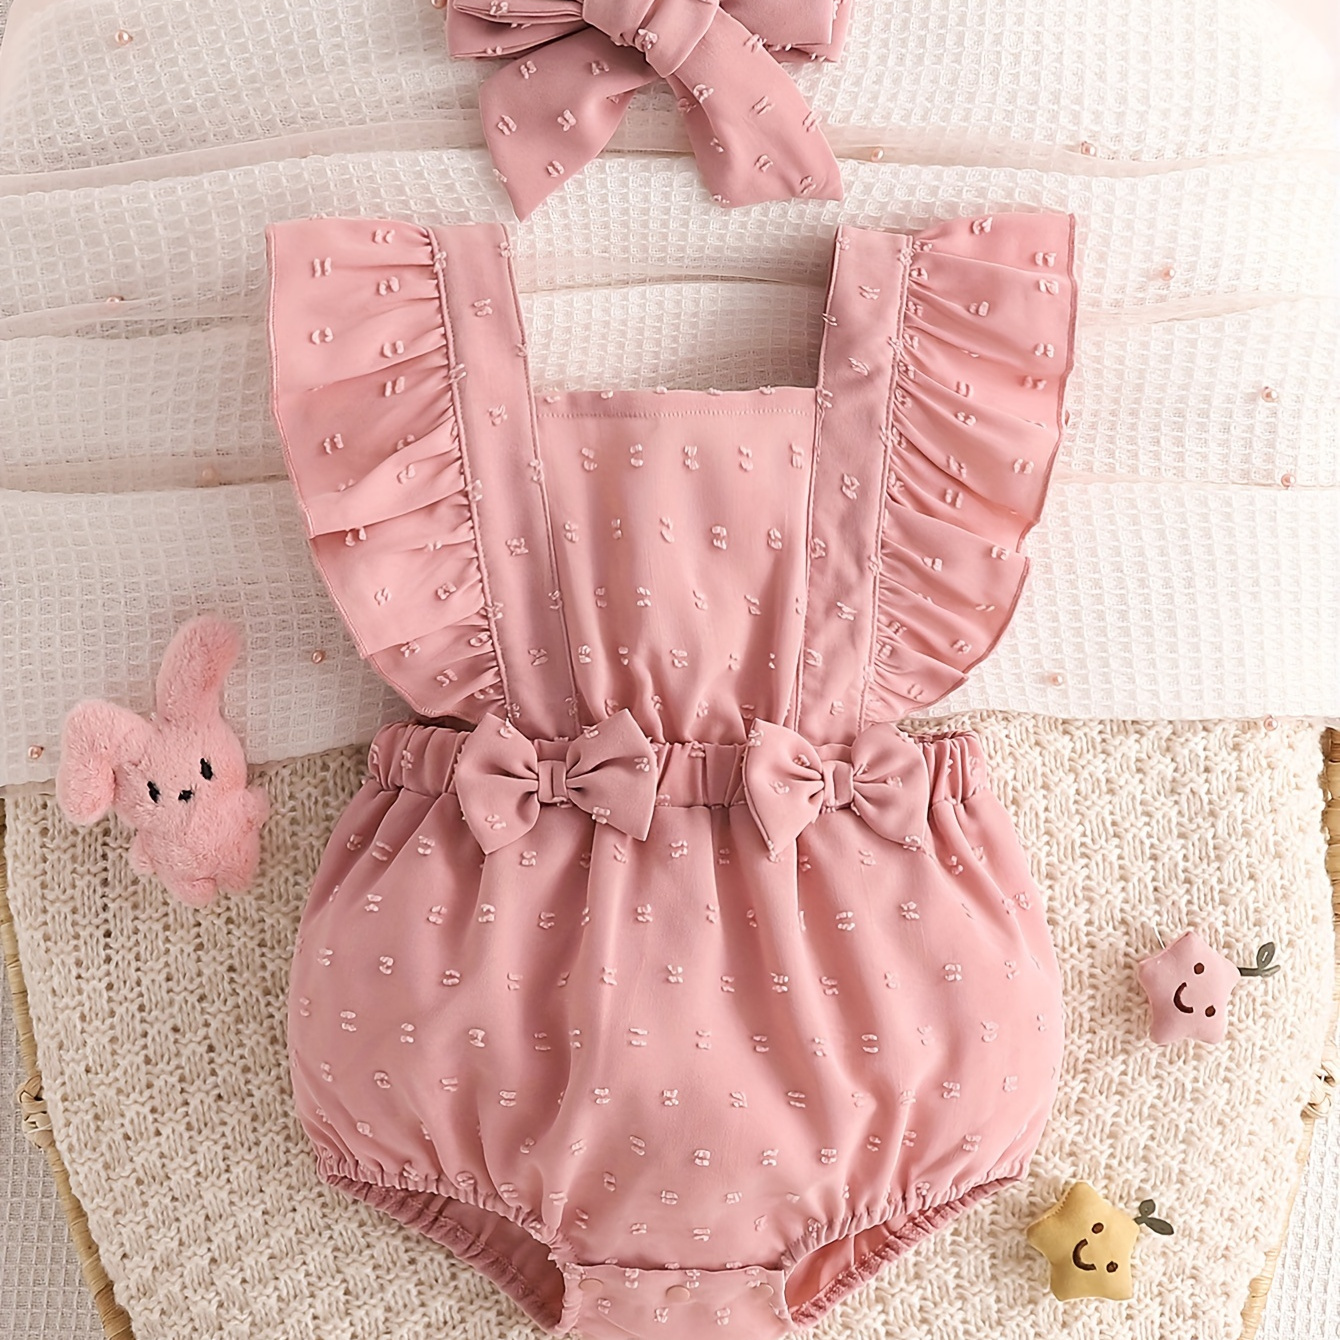 

Baby's Cute Bowknot Decor Solid Color Triangle Bodysuit, Casual Textured Ruffle Sleeve Romper, Toddler & Infant Girl's Onesie For Summer, As Gift